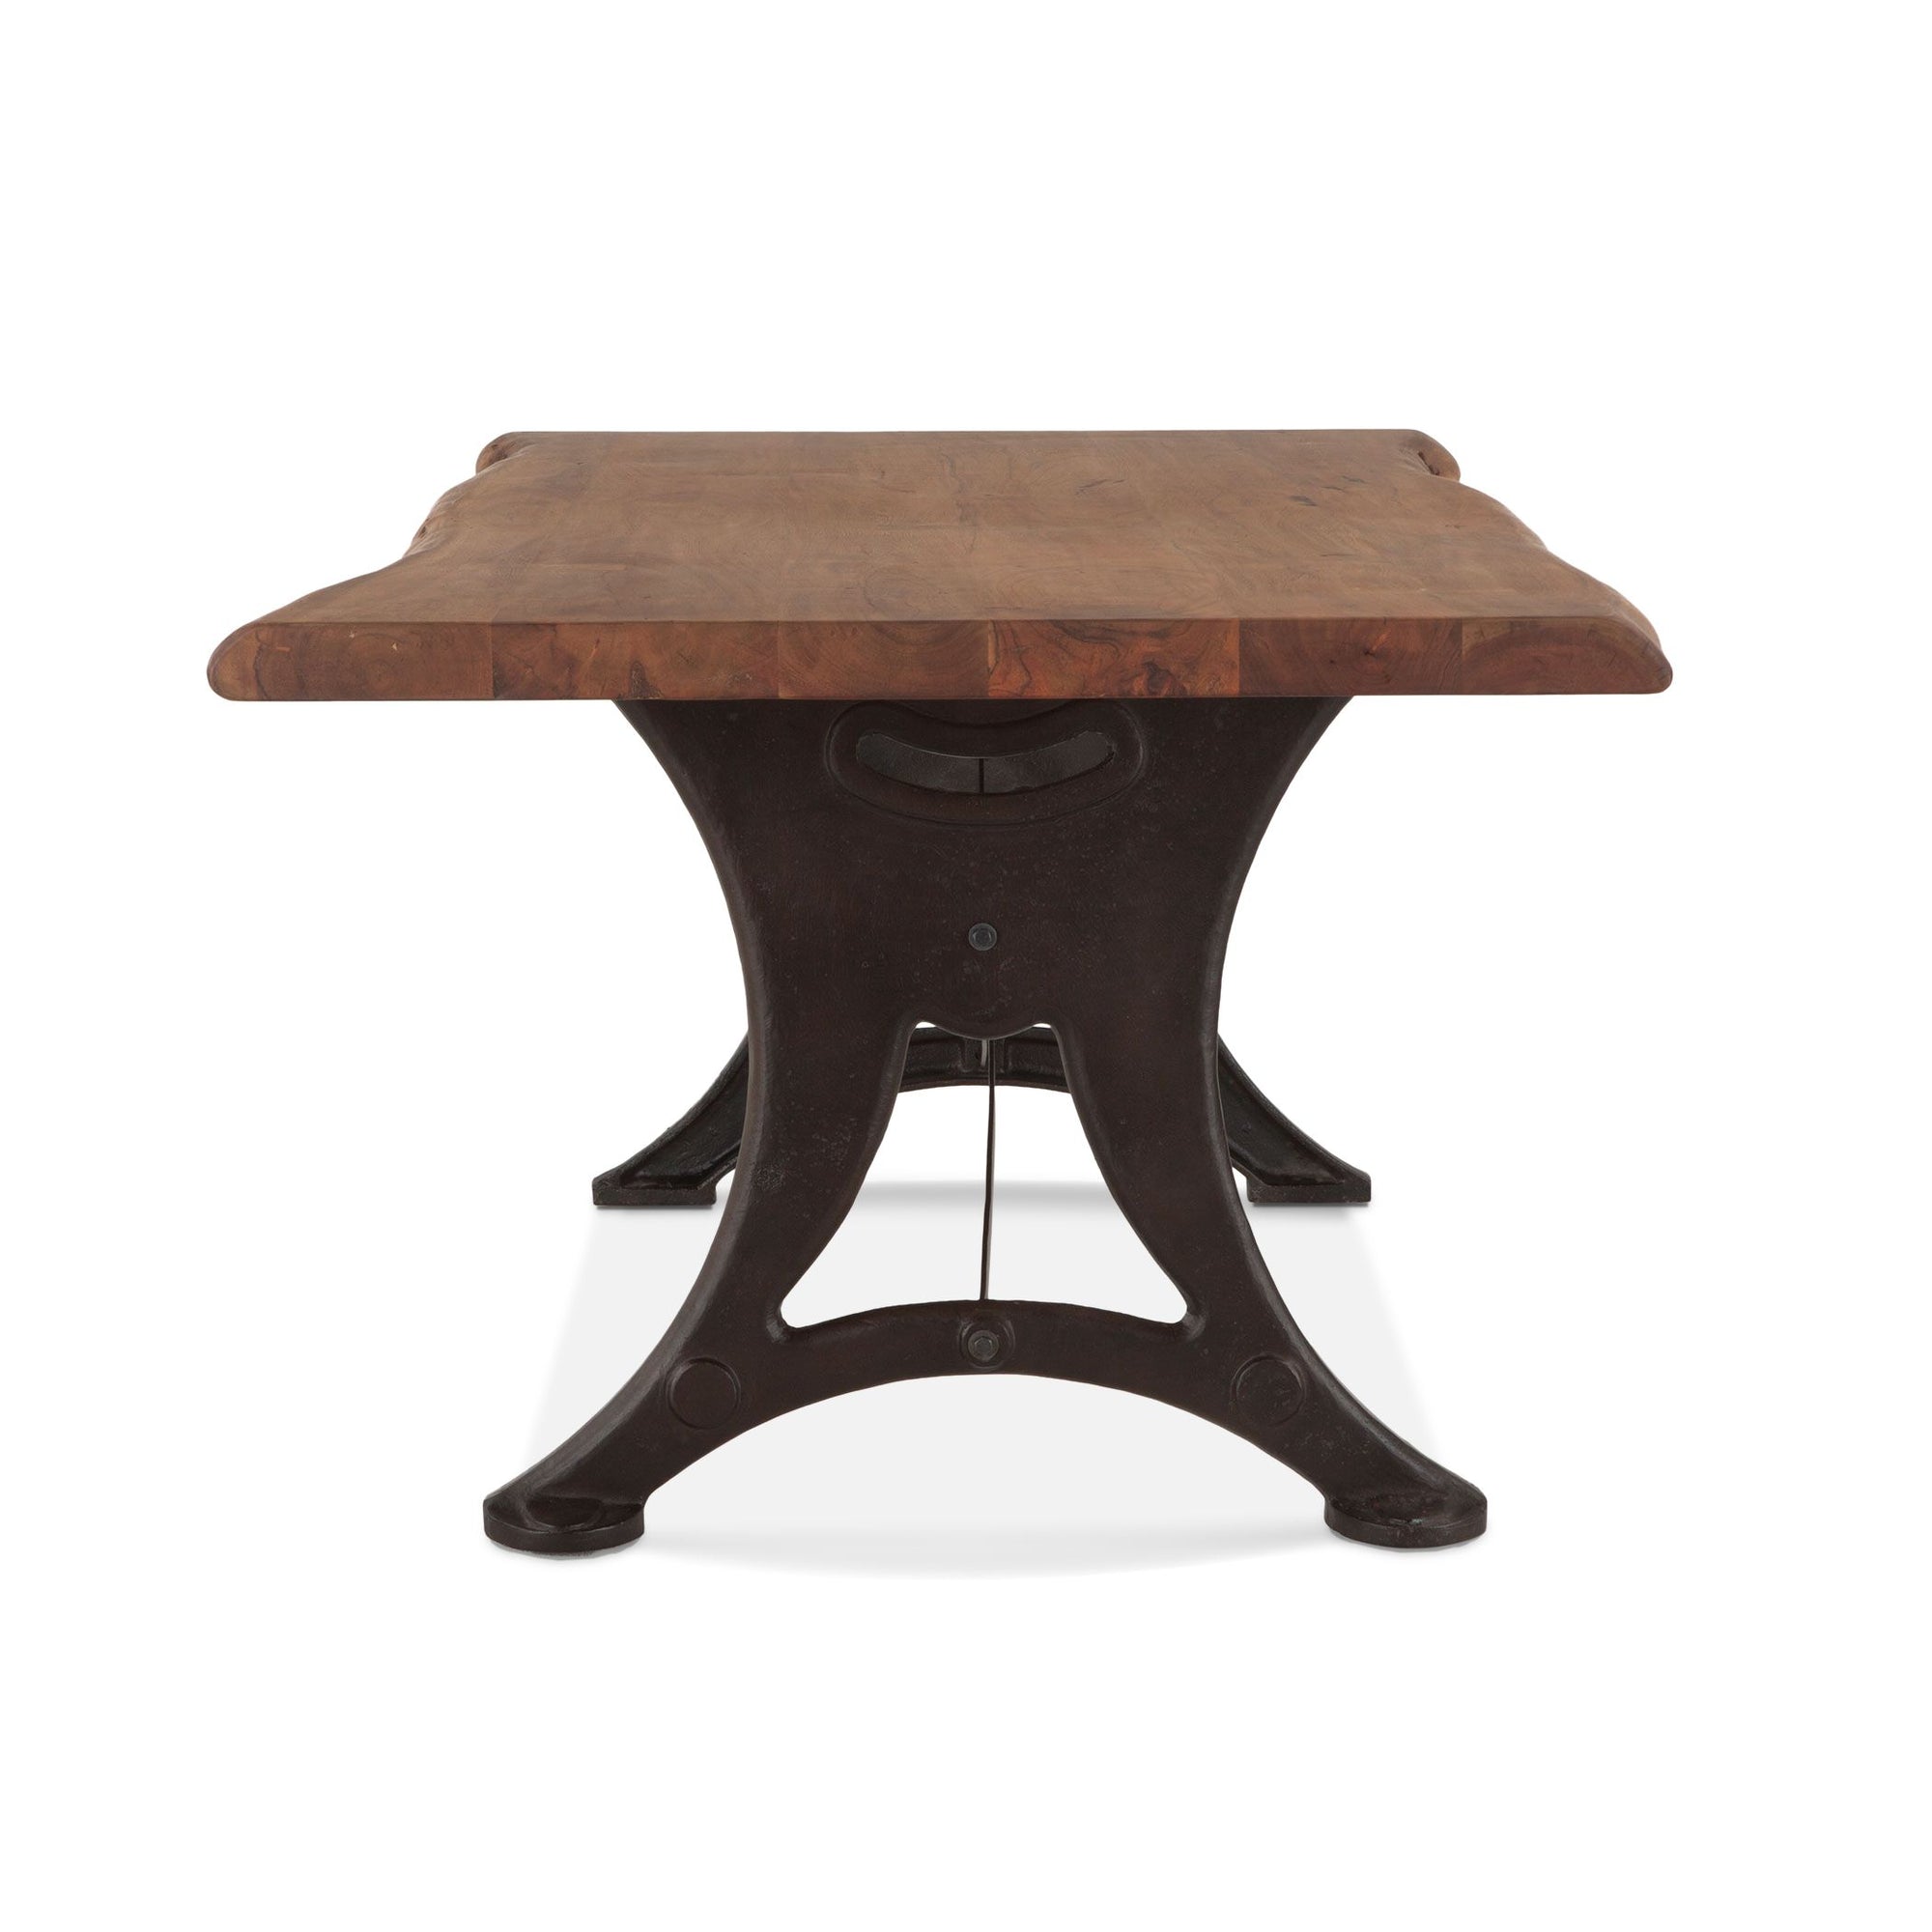 80" Live Edge Rustic Dining Table Industrial Iron Raw Walnut - Furniture on Main